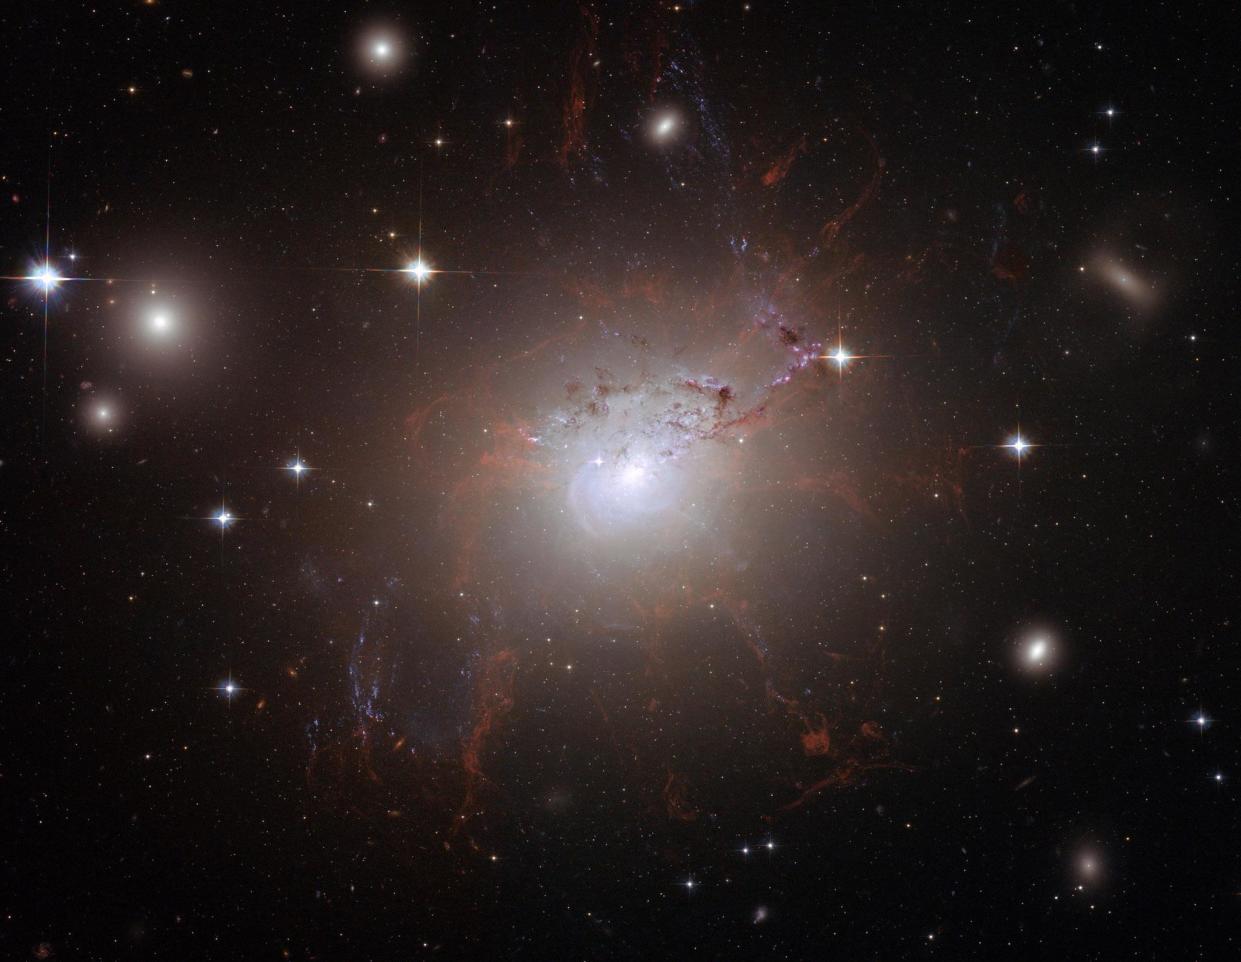 This handout image of the giant, active galaxy NGC 1275, obtained August 21, 2008 was taken using the NASA/ESA Hubble Space Telescope?s Advanced Camera for Surveys in July and August 2006: NASA/ESA via Getty Images